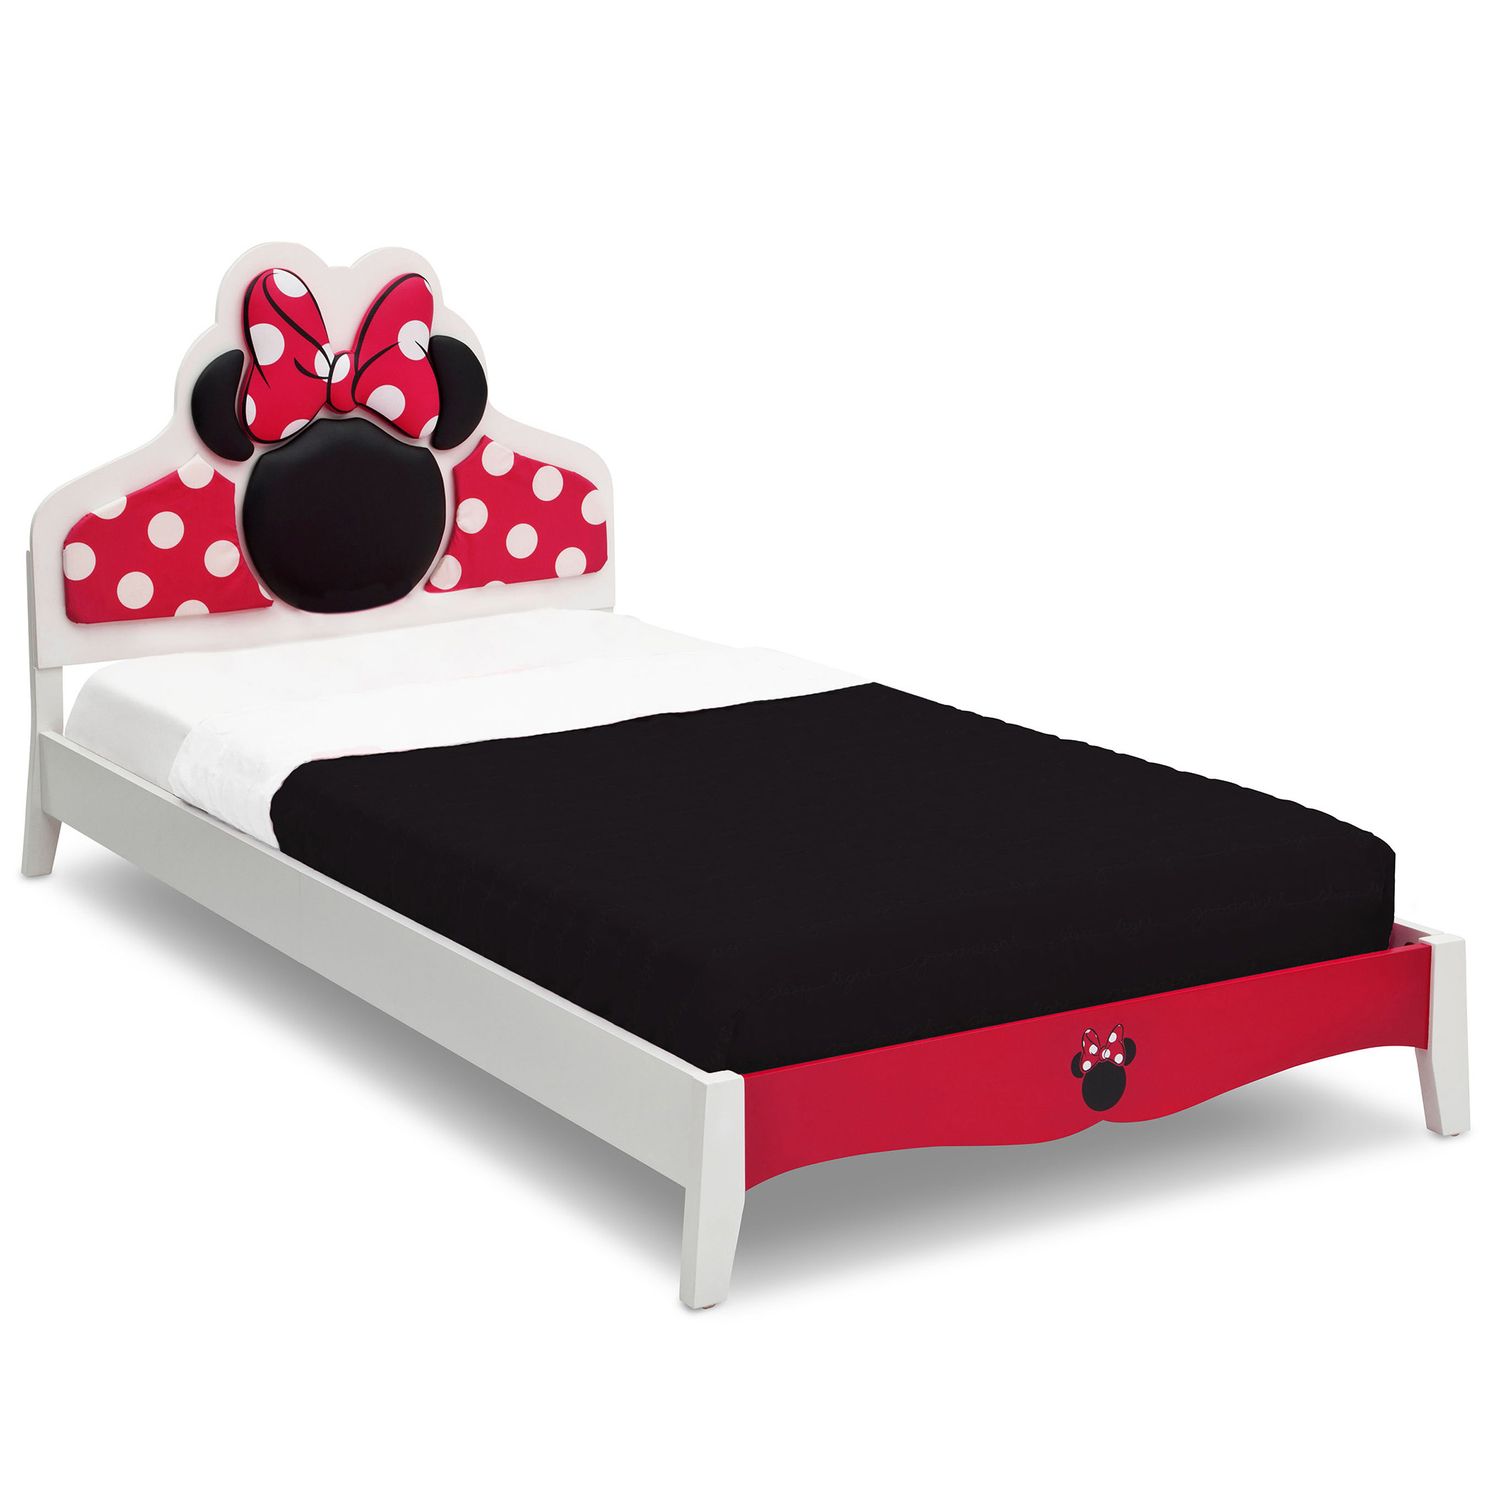 delta minnie mouse twin bed